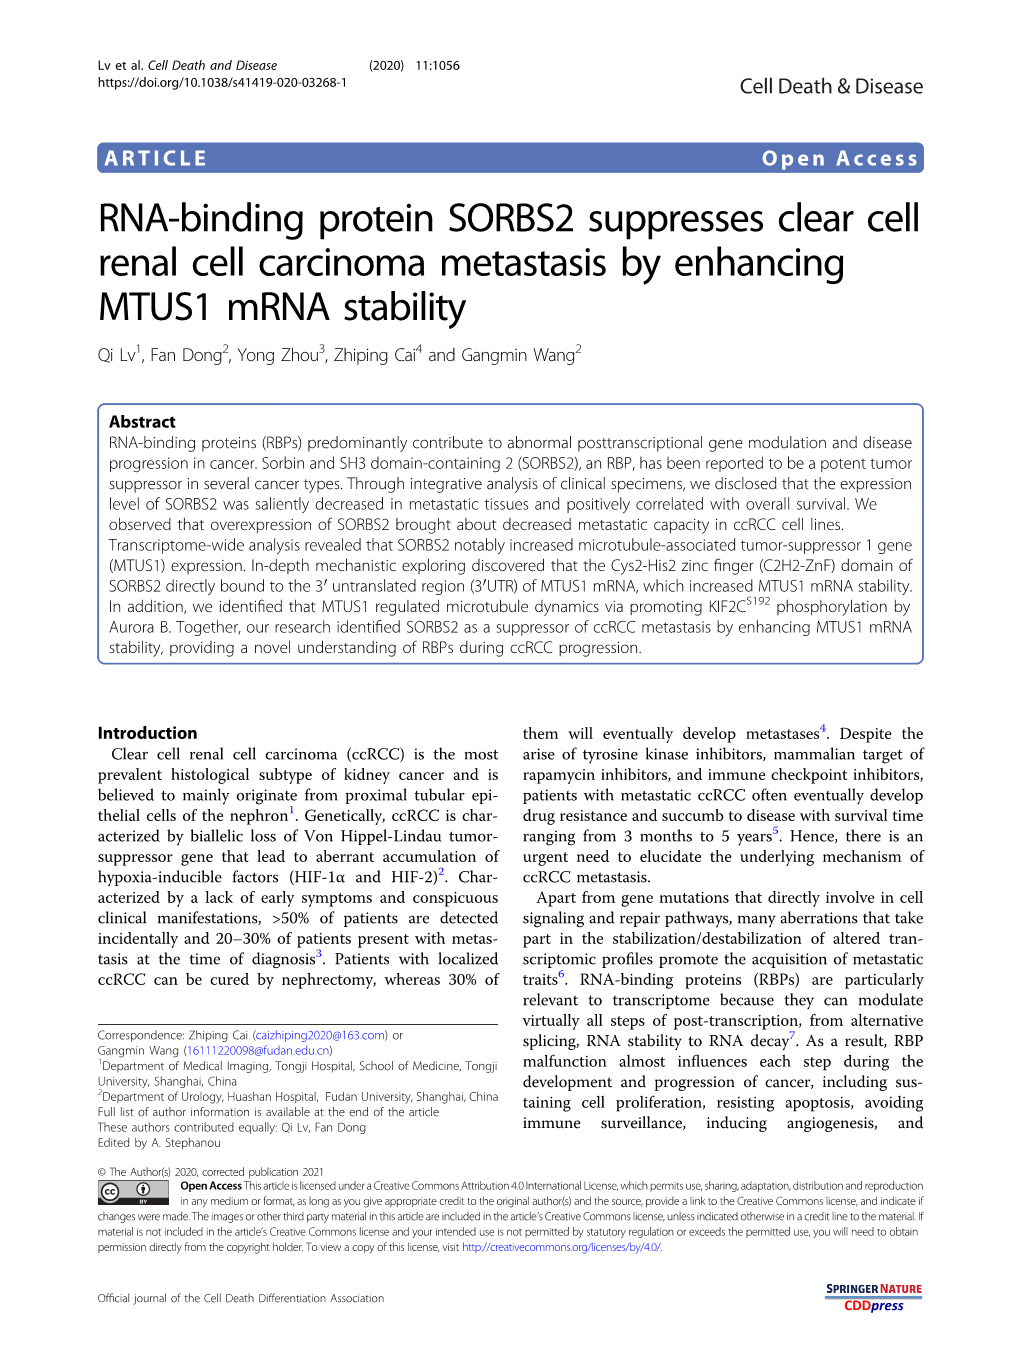 RNA-Binding Protein SORBS2 Suppresses Clear Cell Renal Cell